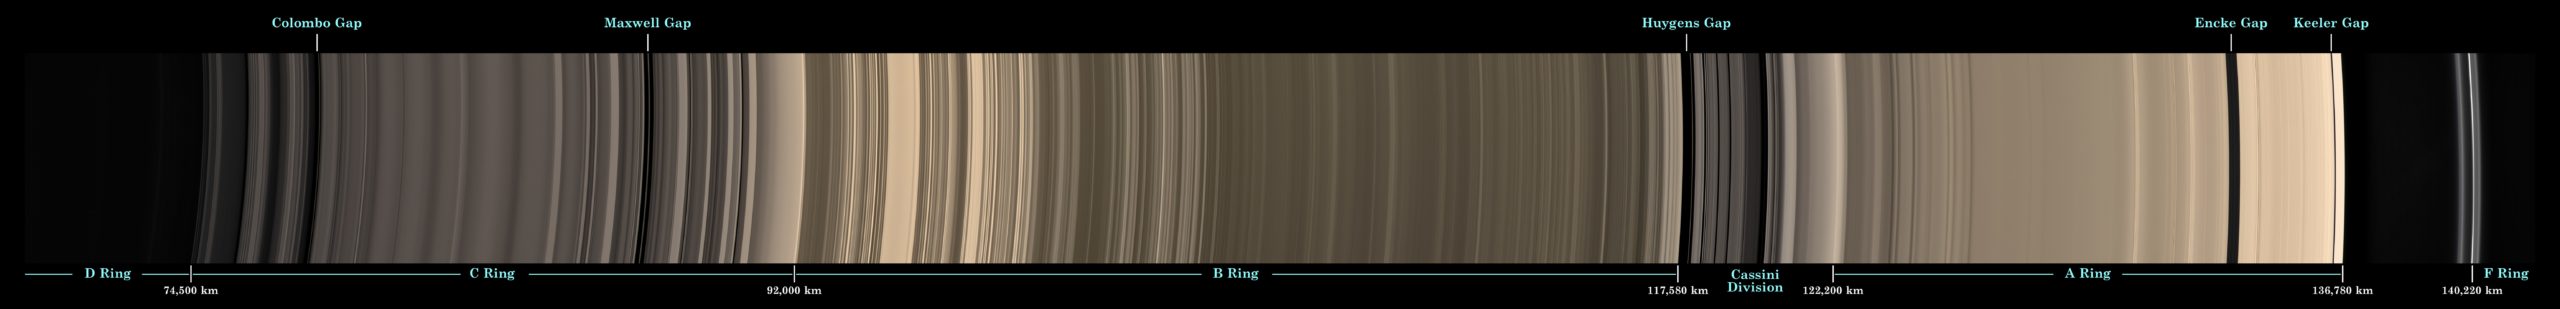 Colourful View Of Saturn’s Rings